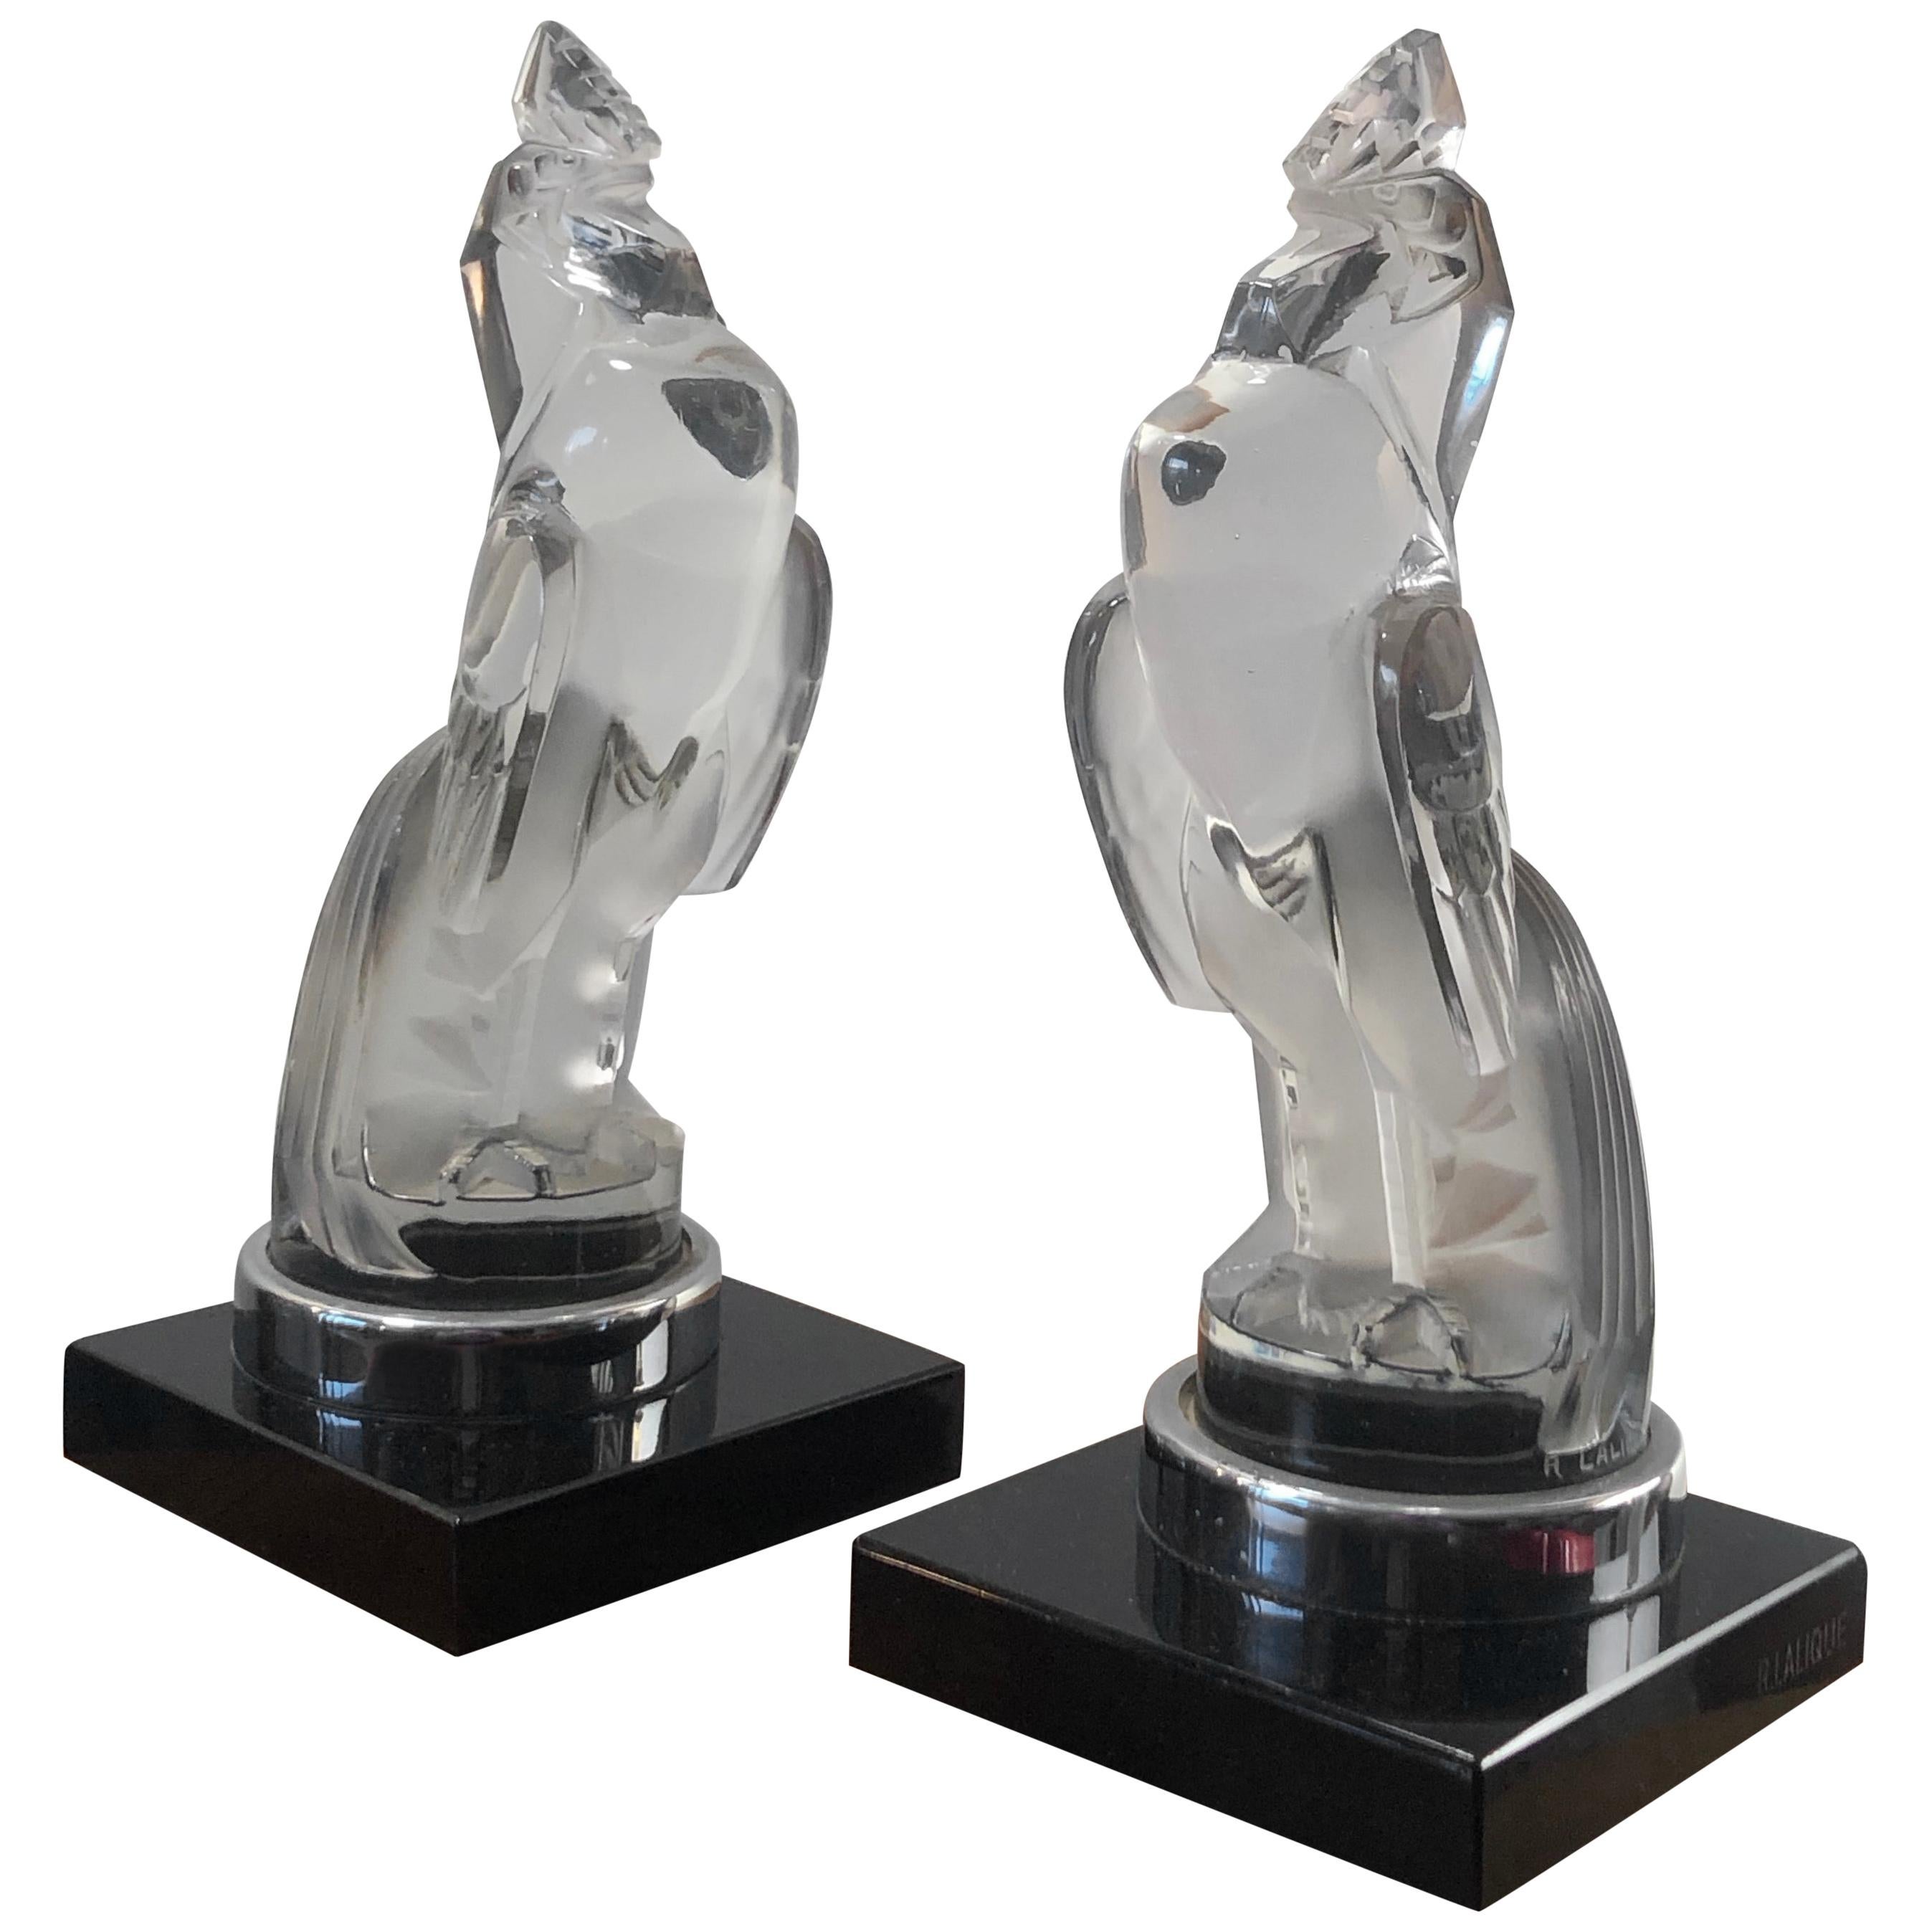 1929 Rene Lalique Pair of Coq Houdan Bookends on Black Glass Bases, Roosters